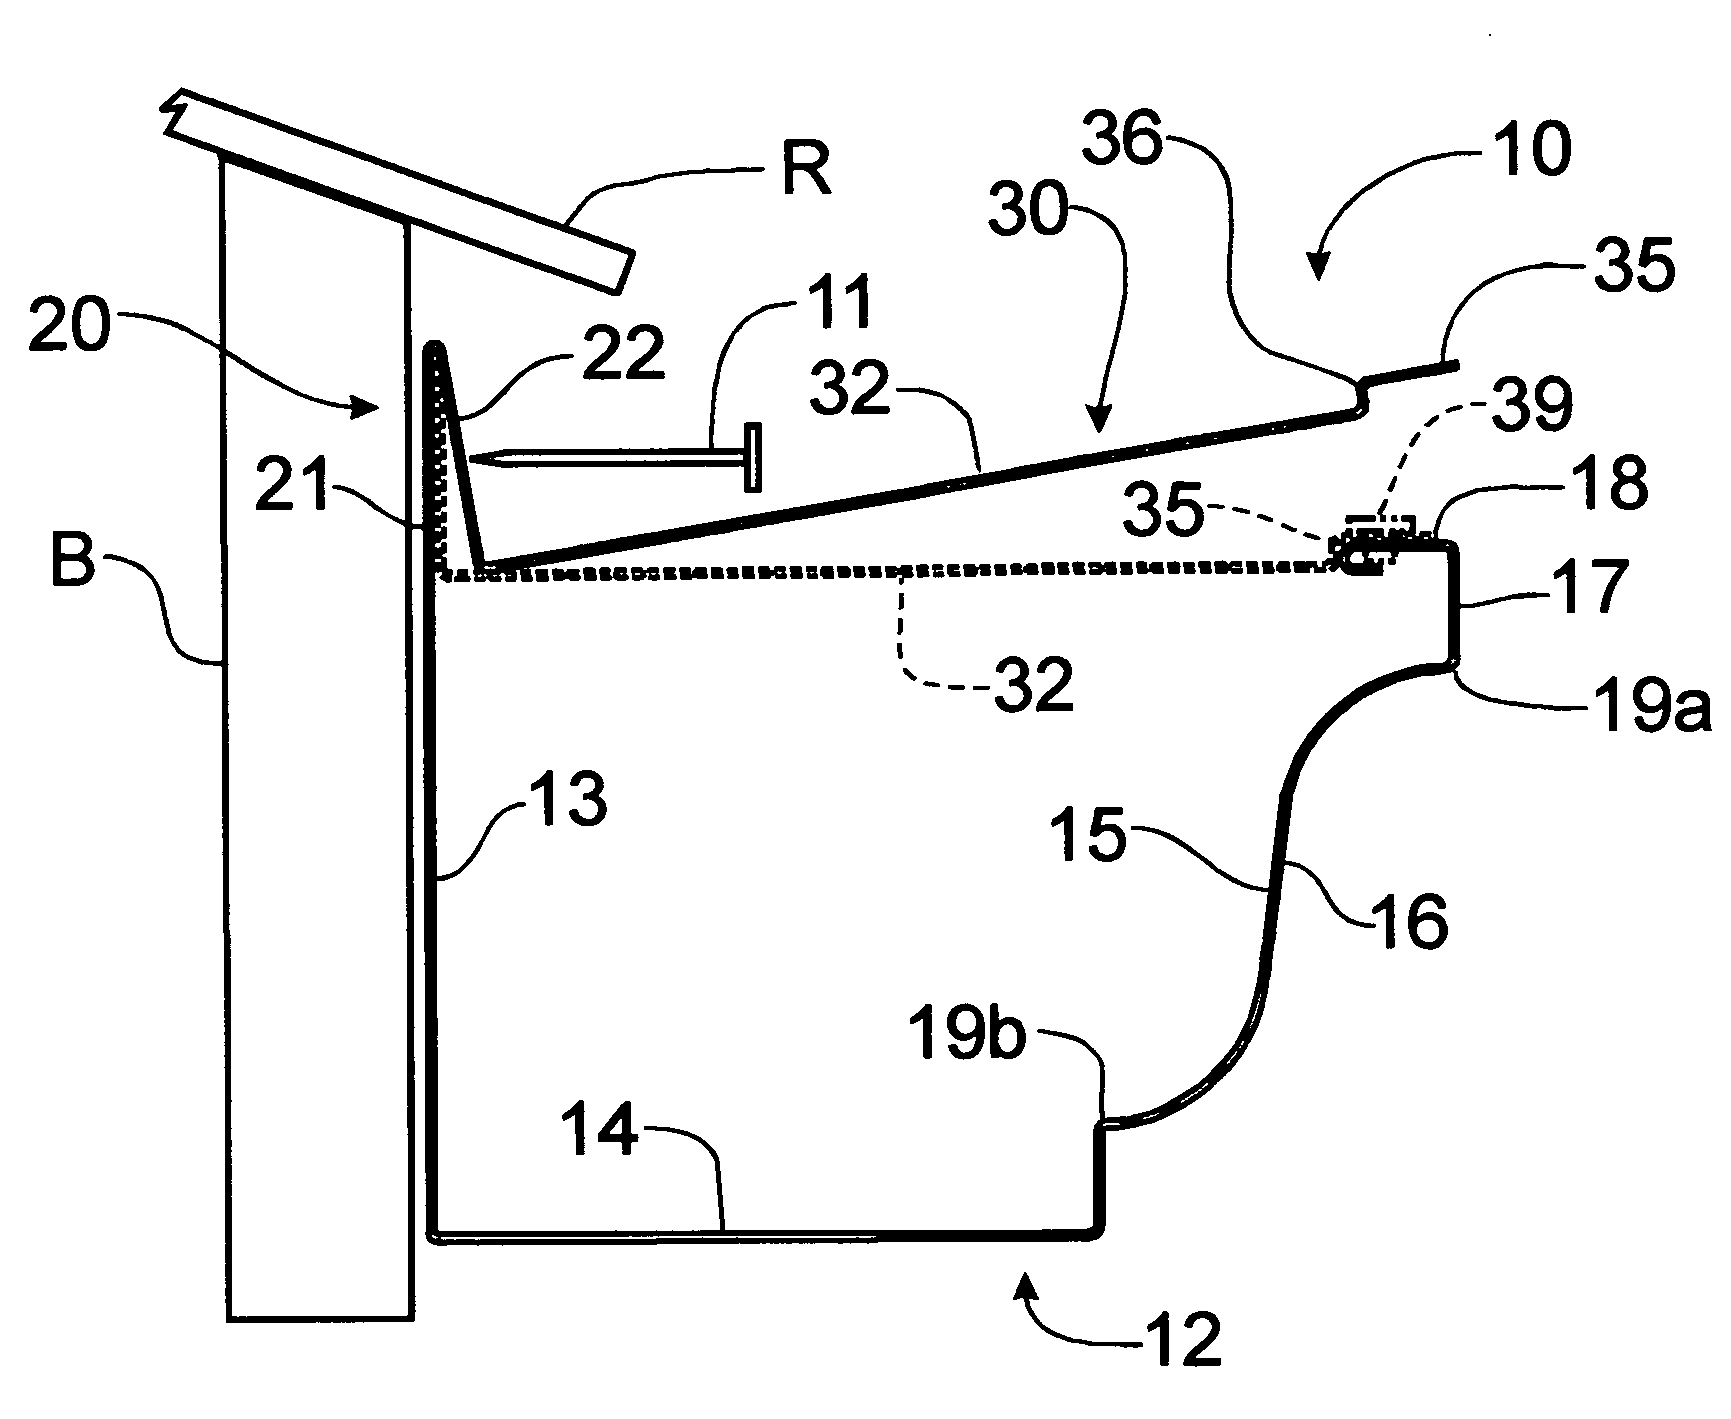 One piece rain gutter and leaf guard apparatus